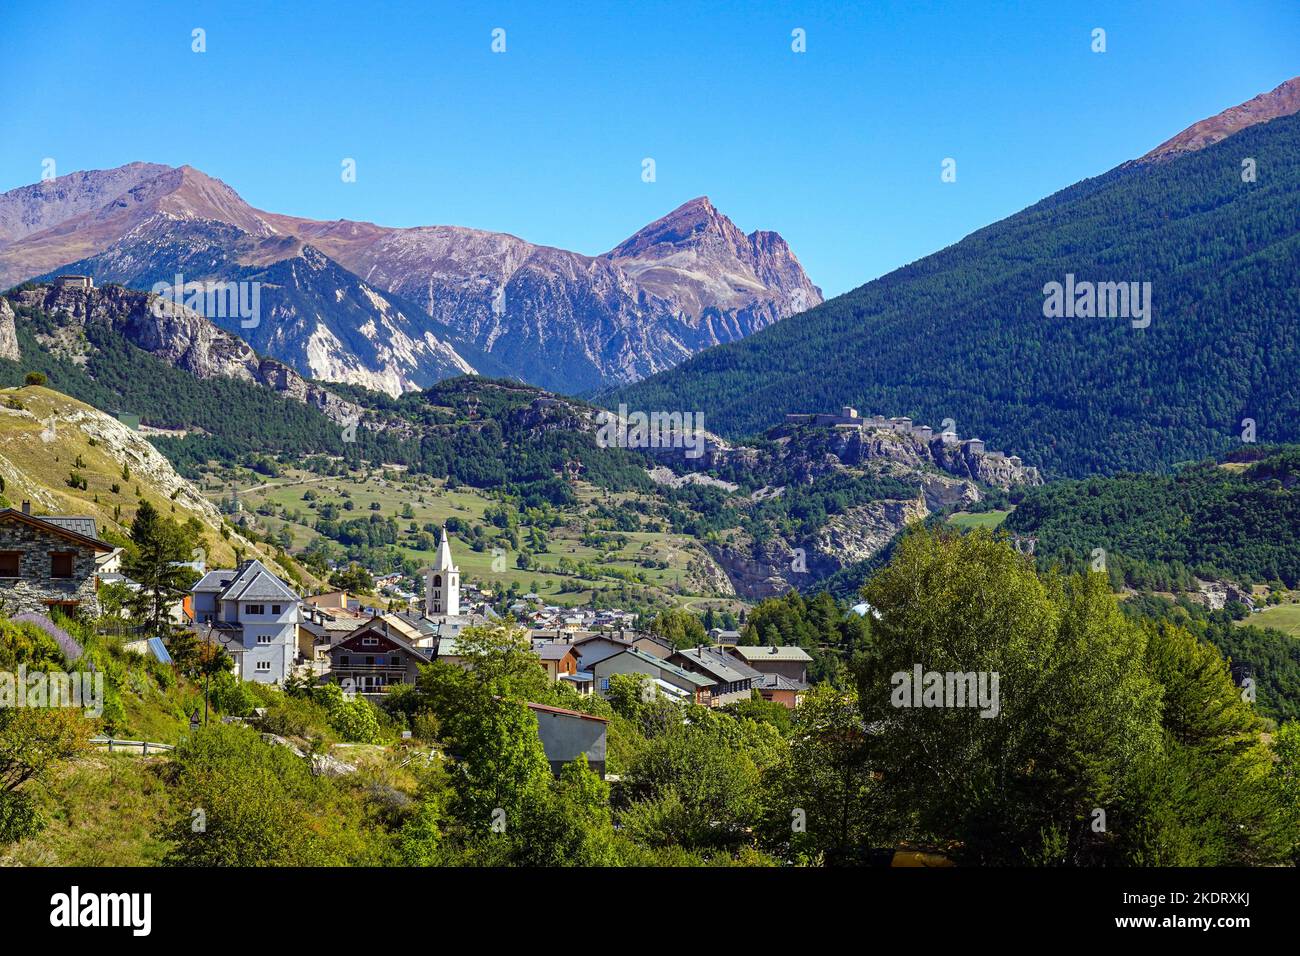 The Essilon Barrier forts and Avrieux in The Maurienne Valley, Vanoise, the French Alps, France, Alps, Alpine Stock Photo